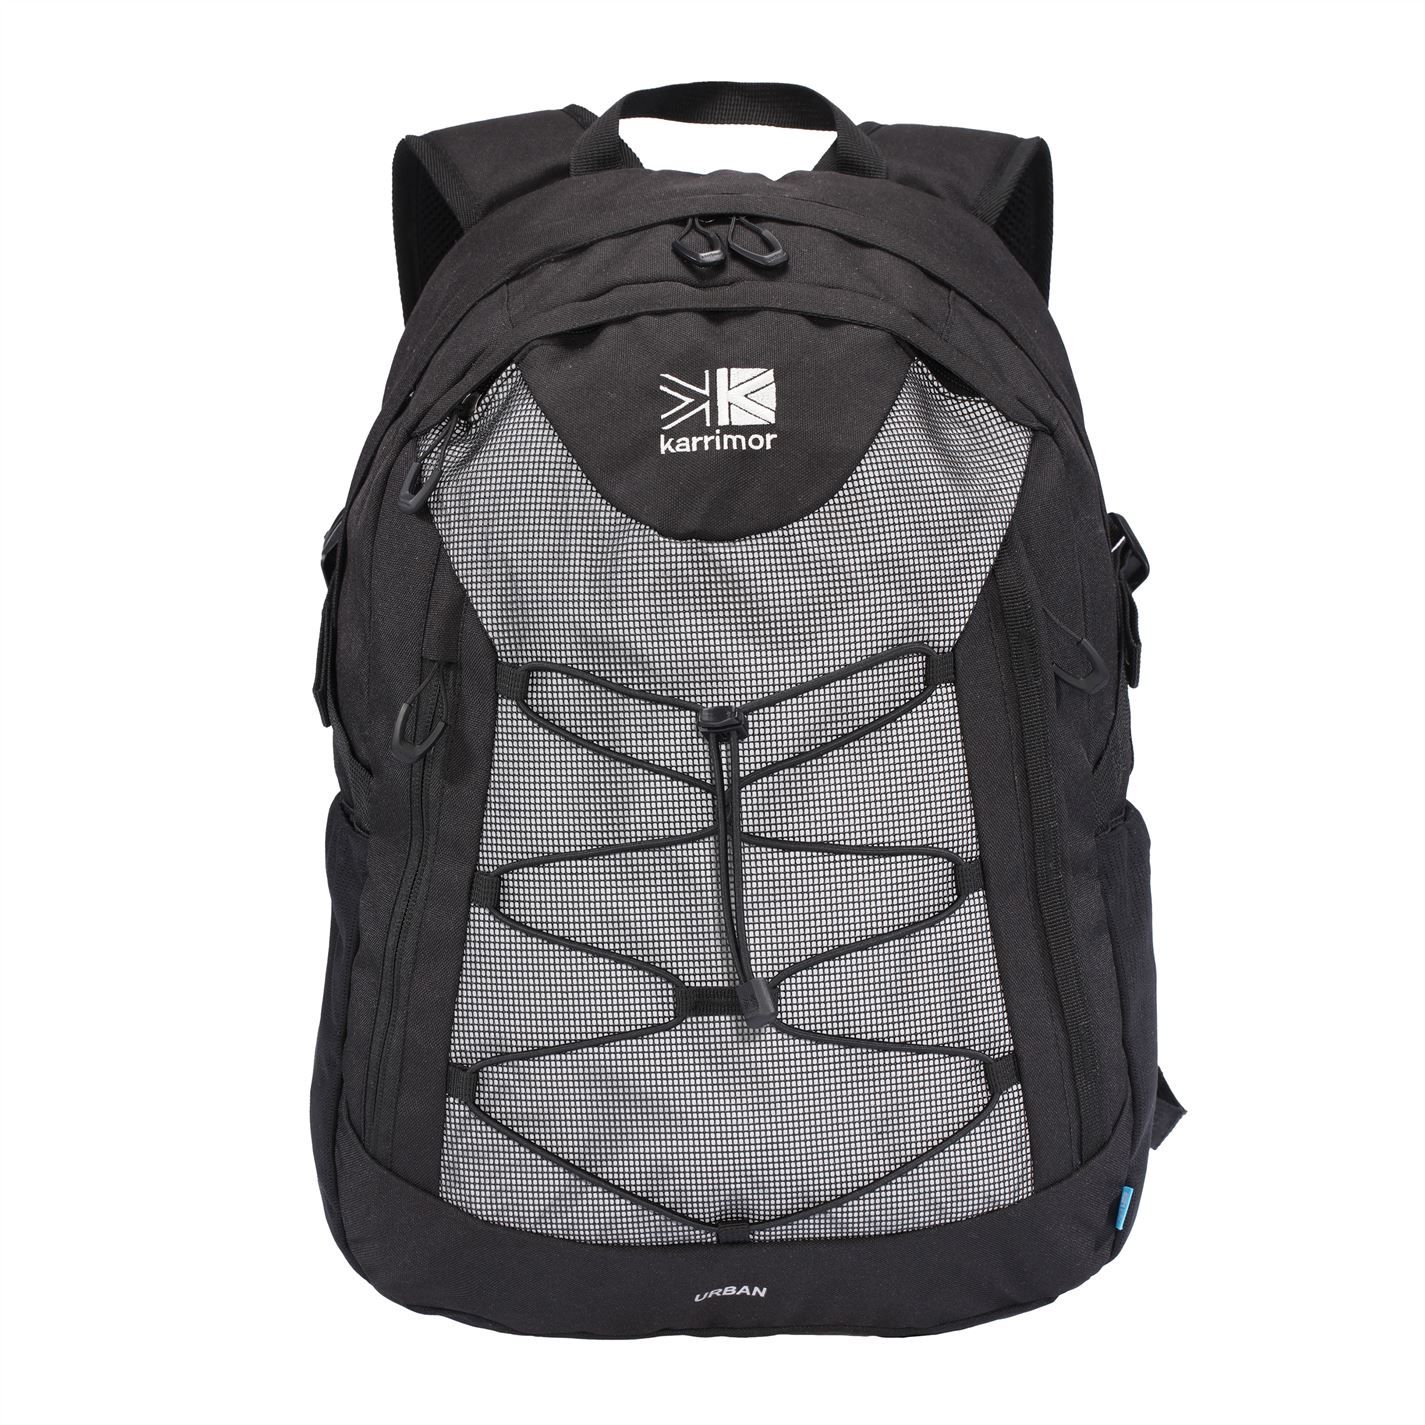 <strong>Karrimor Urban 30 Rucksack</strong><br><br> Be ready for your next adventure with the Urban 30 Rucksack from Karrimor. Crafted with a padded back and straps with adjustable buckles, this piece offers a super-comfortable fit. Additionally, it features external pockets for extra storage space, a drawstring fastening, laptop compartment, and water bottle holders on the sides.<br>> This product may have slight cosmetic differences from the image shown due to assorted colours or updated seasonal collections<br>> Rucksack<br>> 30 litre capacity<br>> Laptop compartment<br>> Organiser pocket<br>> Carry handle<br>> Reflective detail<br>> Bungee cord<br>> KS p600D<br>> Cool mesh<br>> H48cm x W35cm x D13cm<br>> Wipe clean with a damp cloth